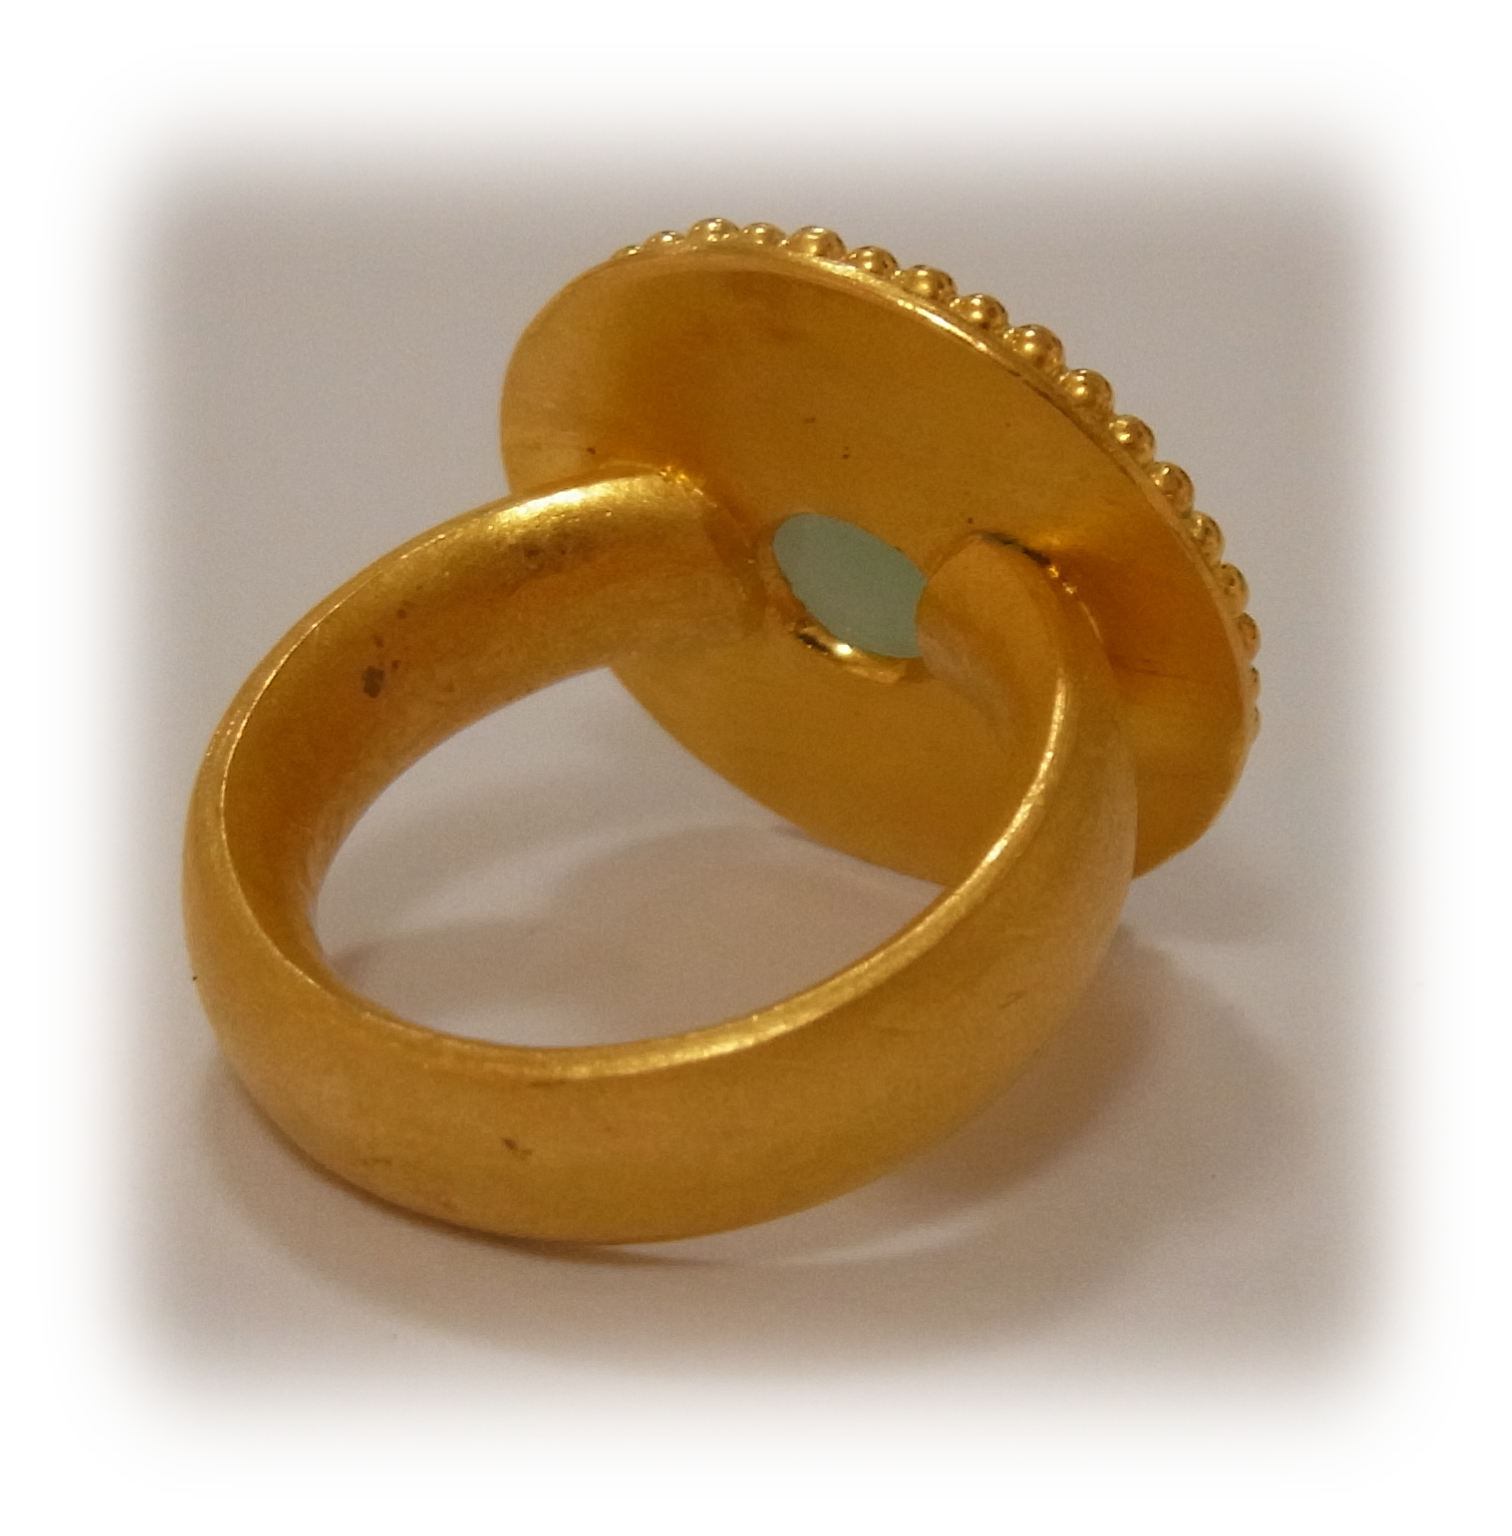 Round-cabochon green Jadeite ring with gold granulation (seen from the back)